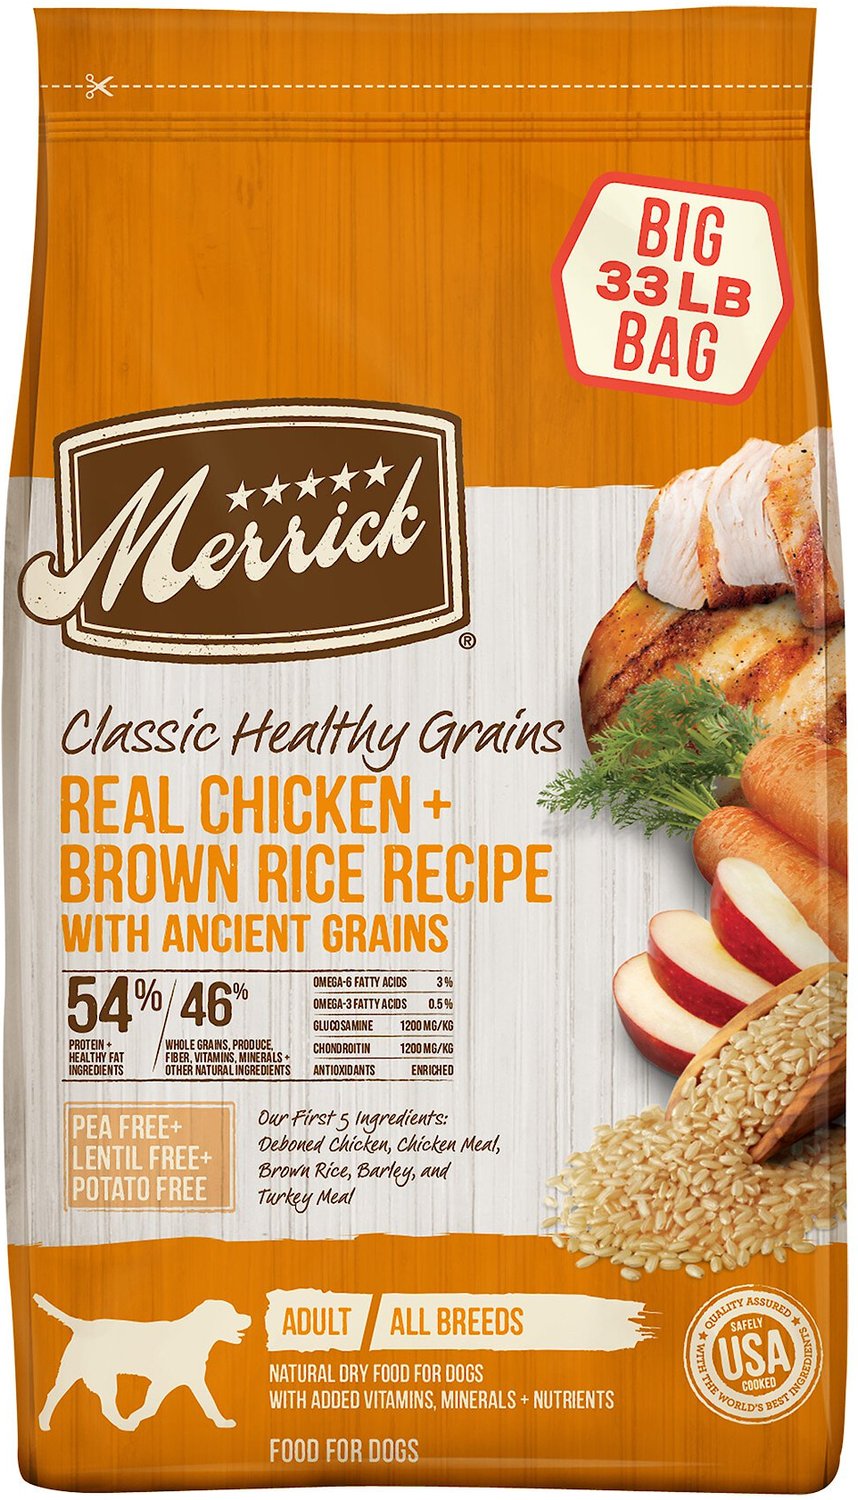 Merrick Classic Healthy Grains Real Chicken + Brown Rice